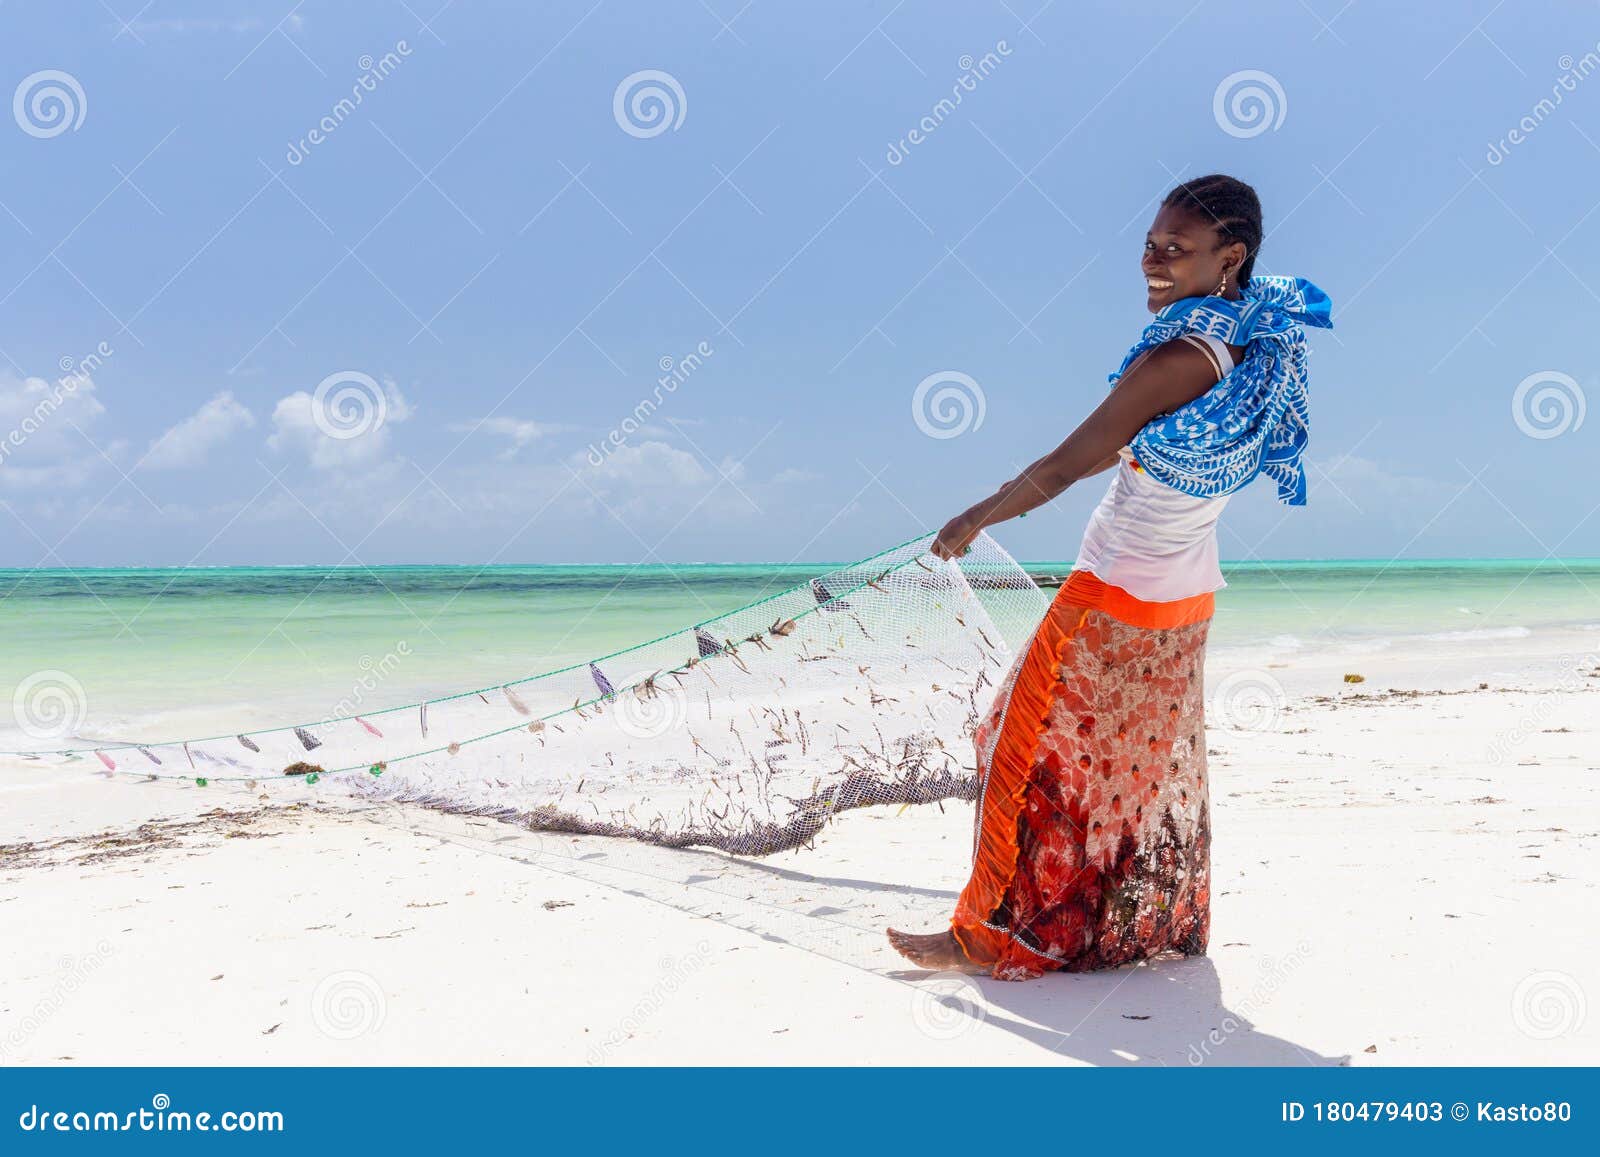 African Local Rural Fishing on Paje Beach, Zanzibar, Traditionally Dressed Local Woman Pulling Editorial Stock Photo Image of food, culture: 180479403